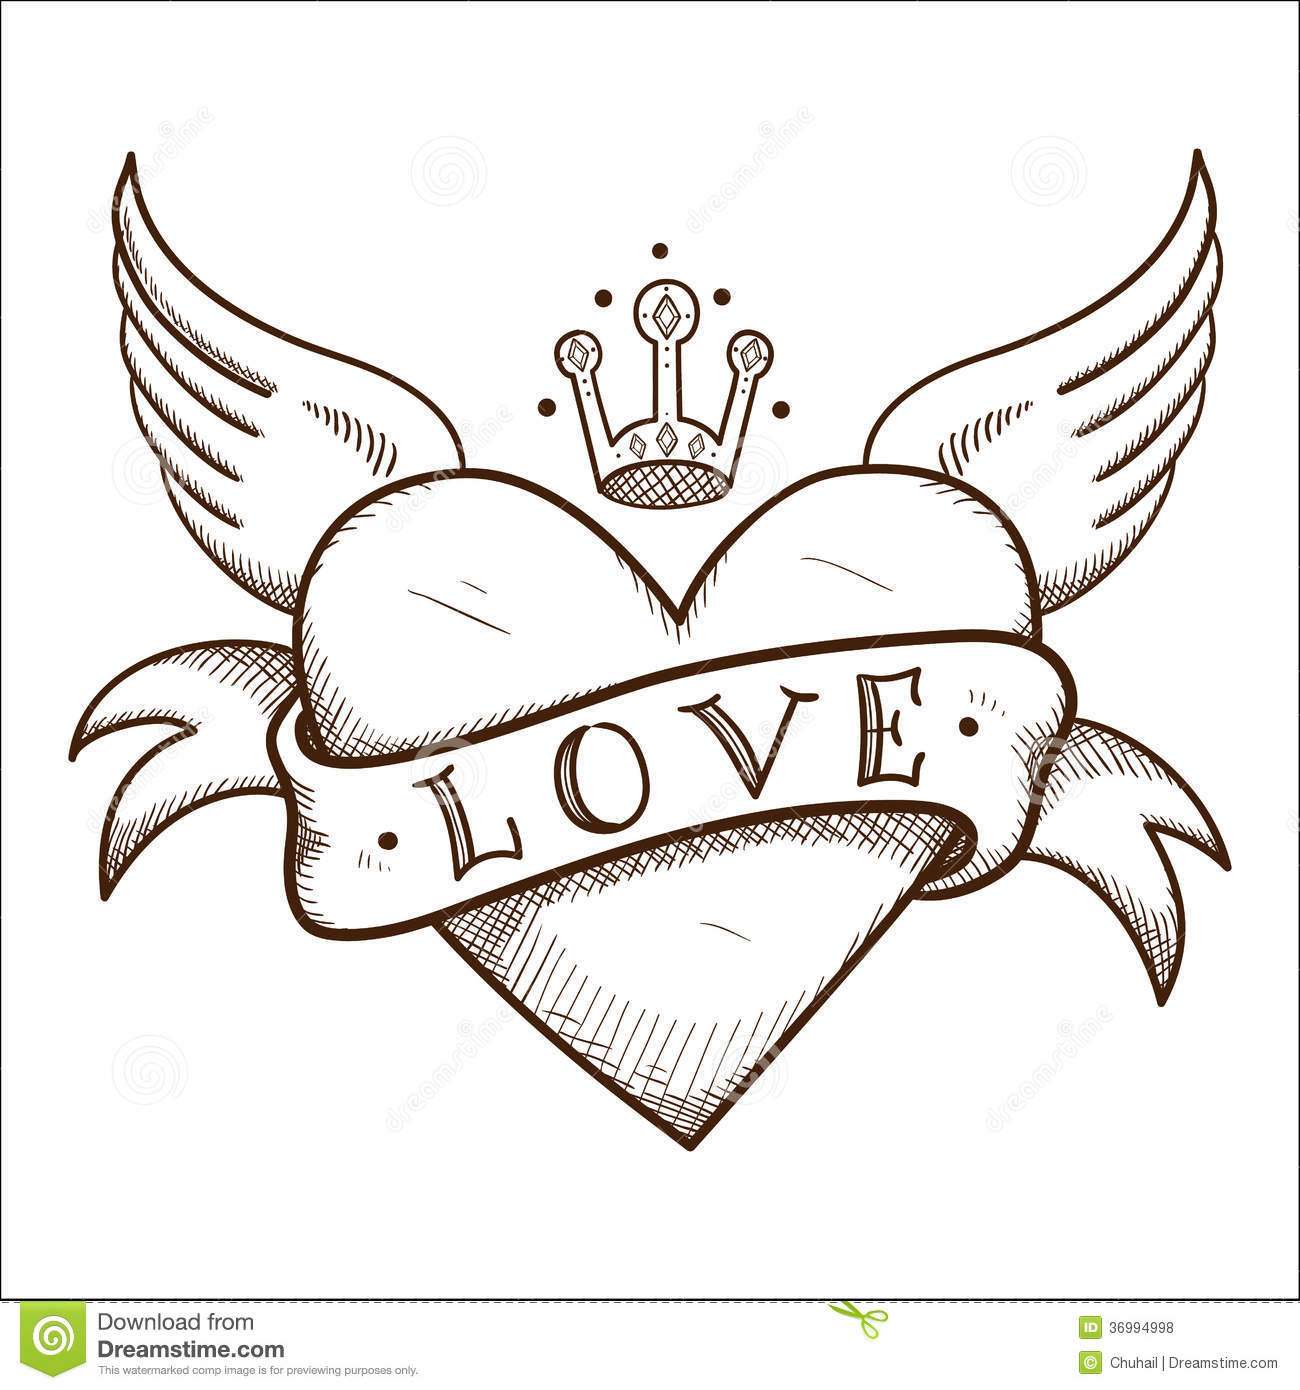 Albums 98+ Images pencil drawings of hearts with wings and banners Stunning